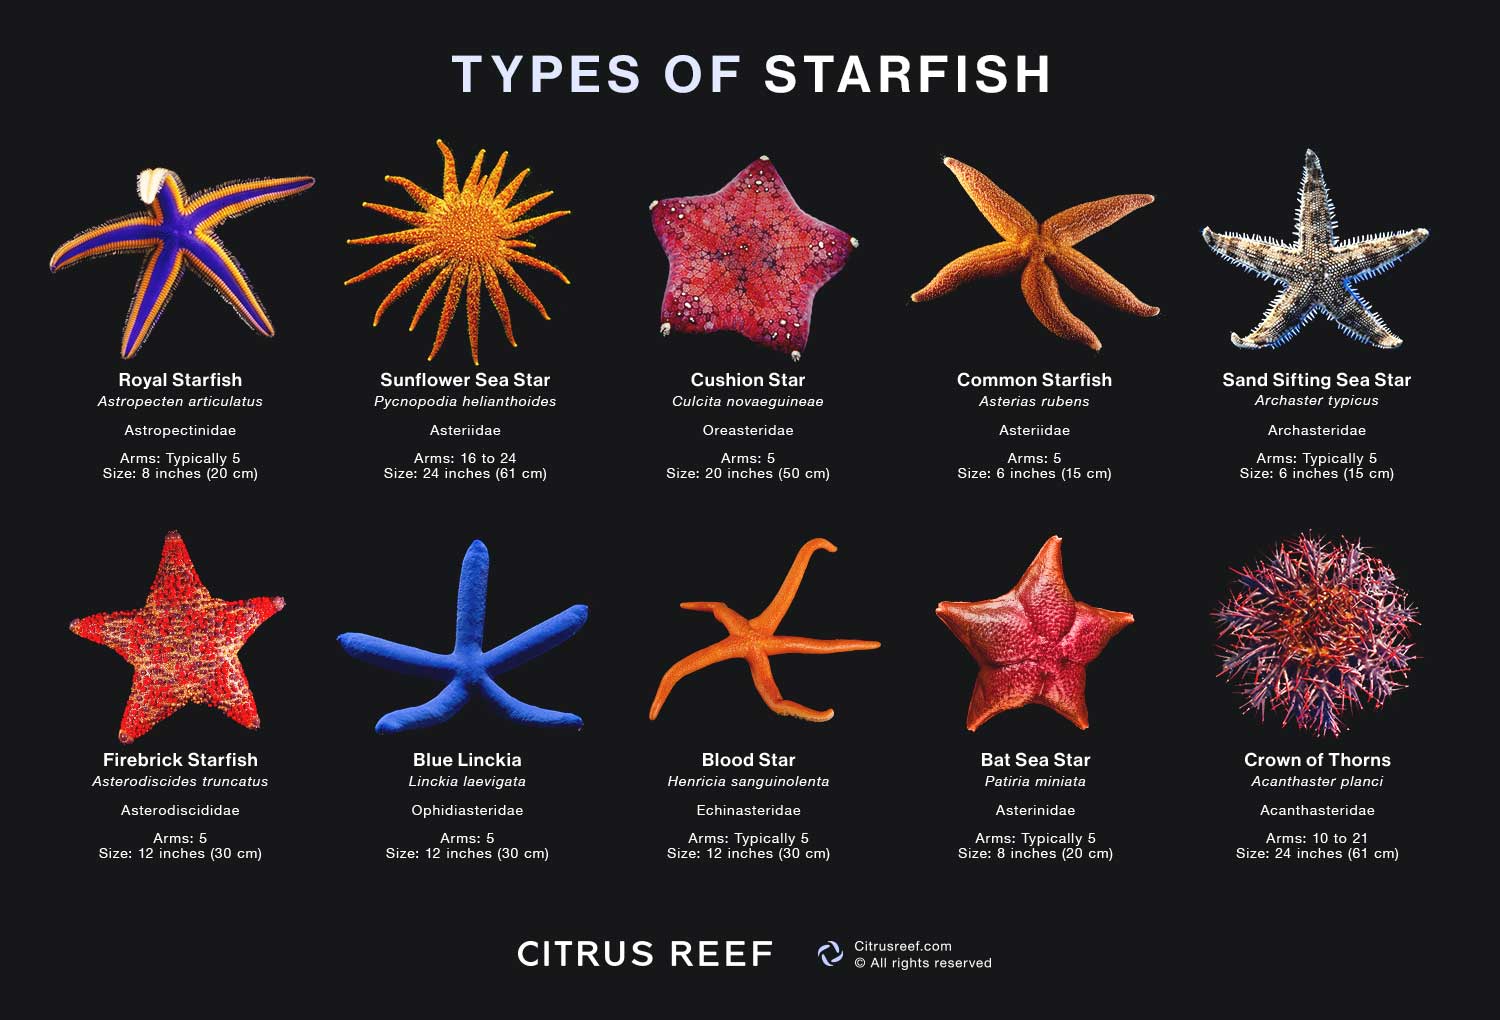 Types Of Starfish 12 Incredible Sea Star Species image